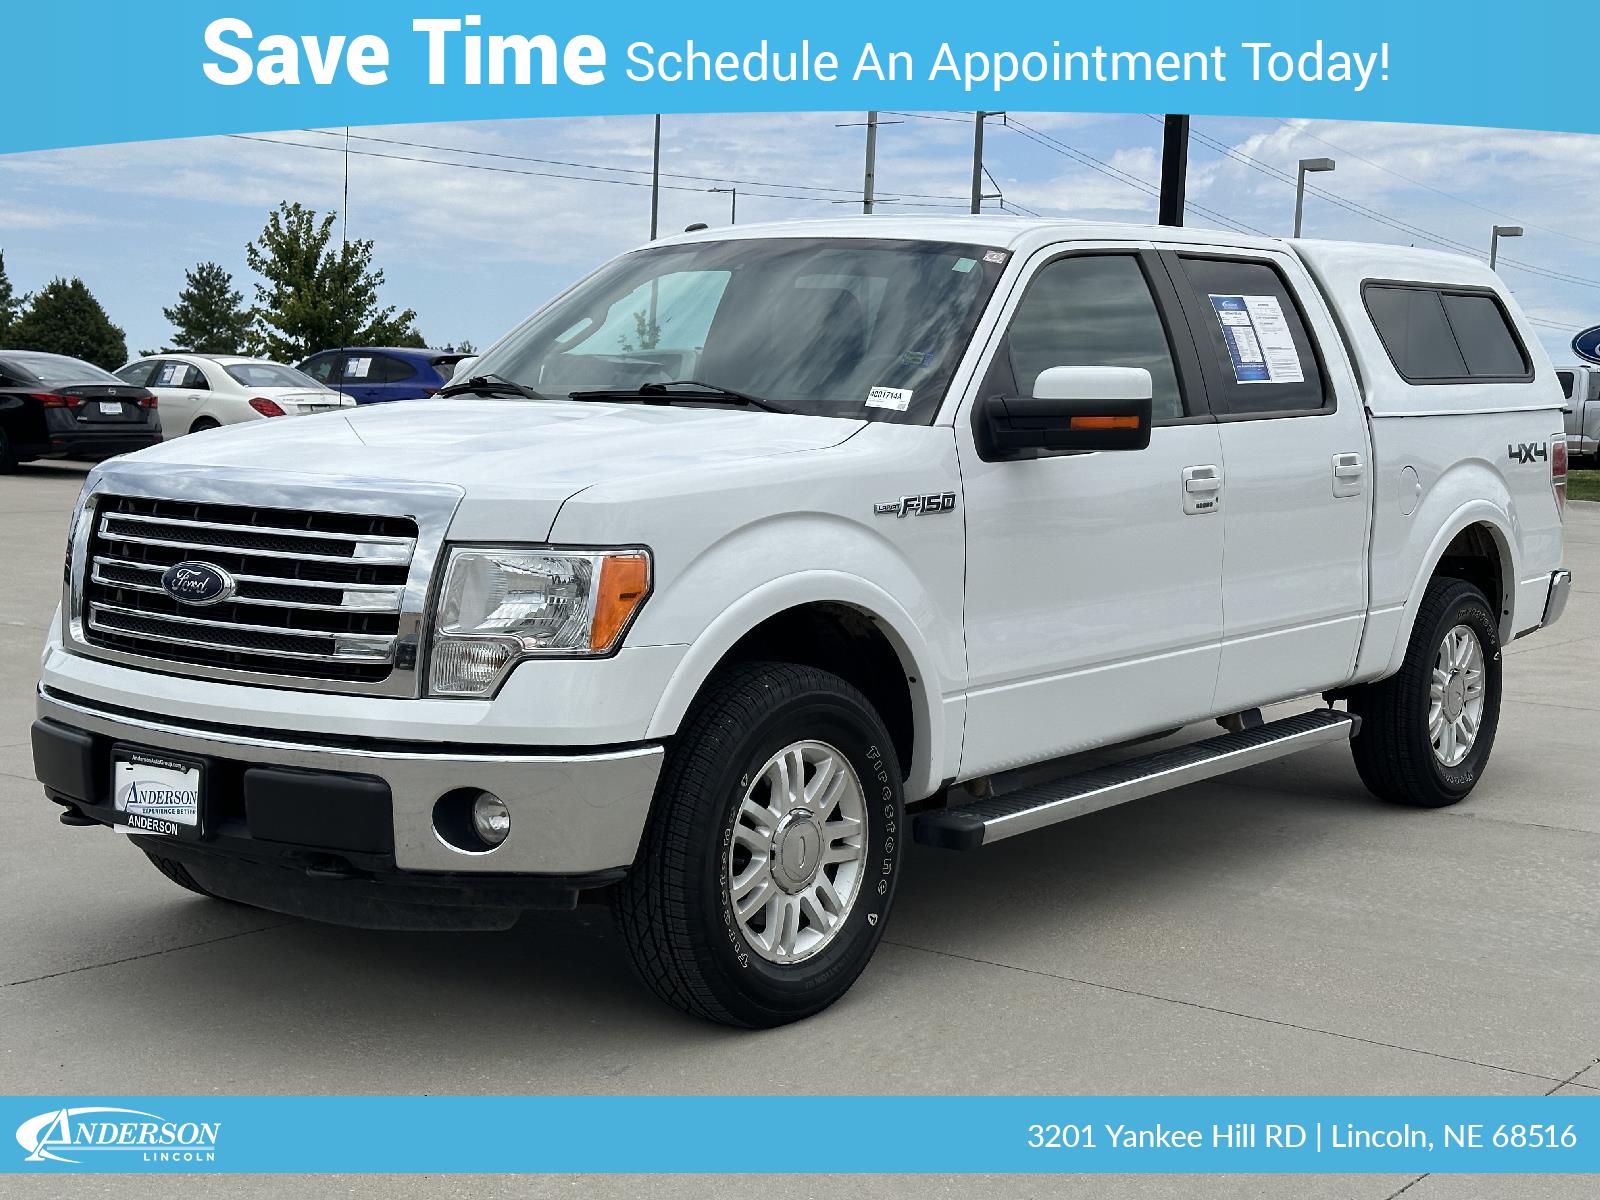 Used 2013 Ford F-150 Lariat Stock: 4001714A